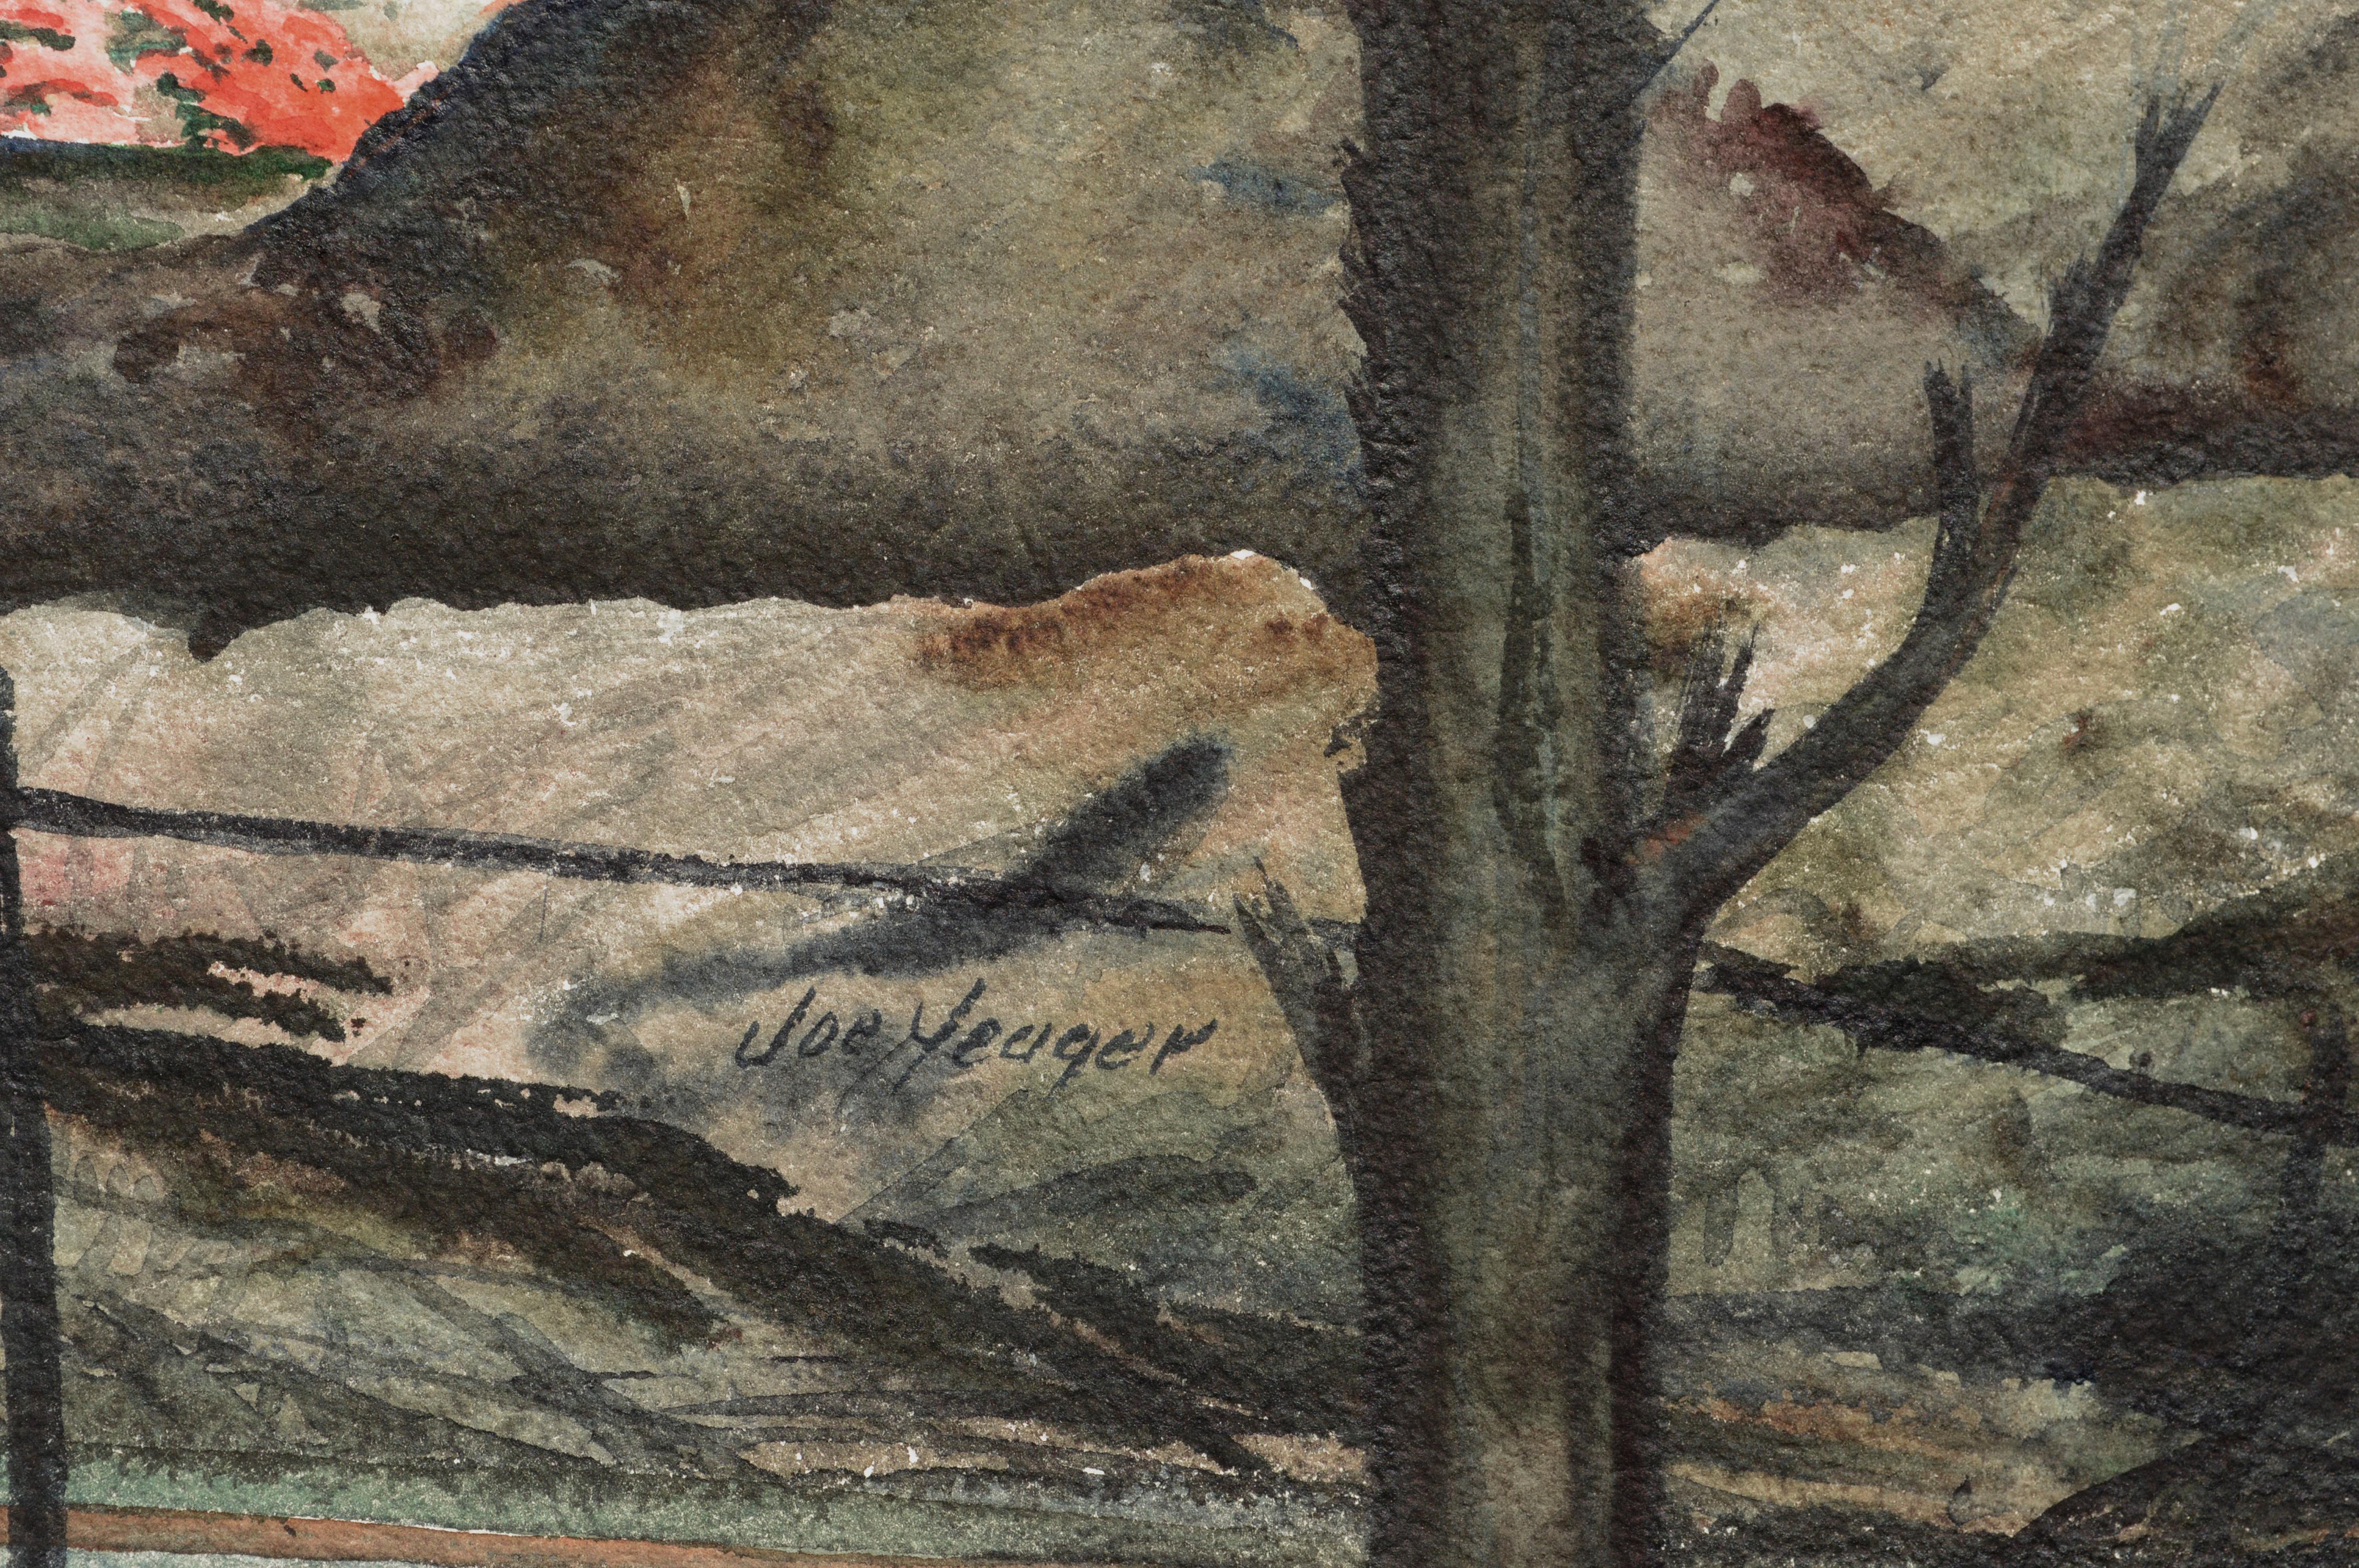 Detailed industrial landscape of an open-pit mine by Joseph Yeager (early-mid 20th Century) on heavy bond watercolor paper with ragged edges. Signed 